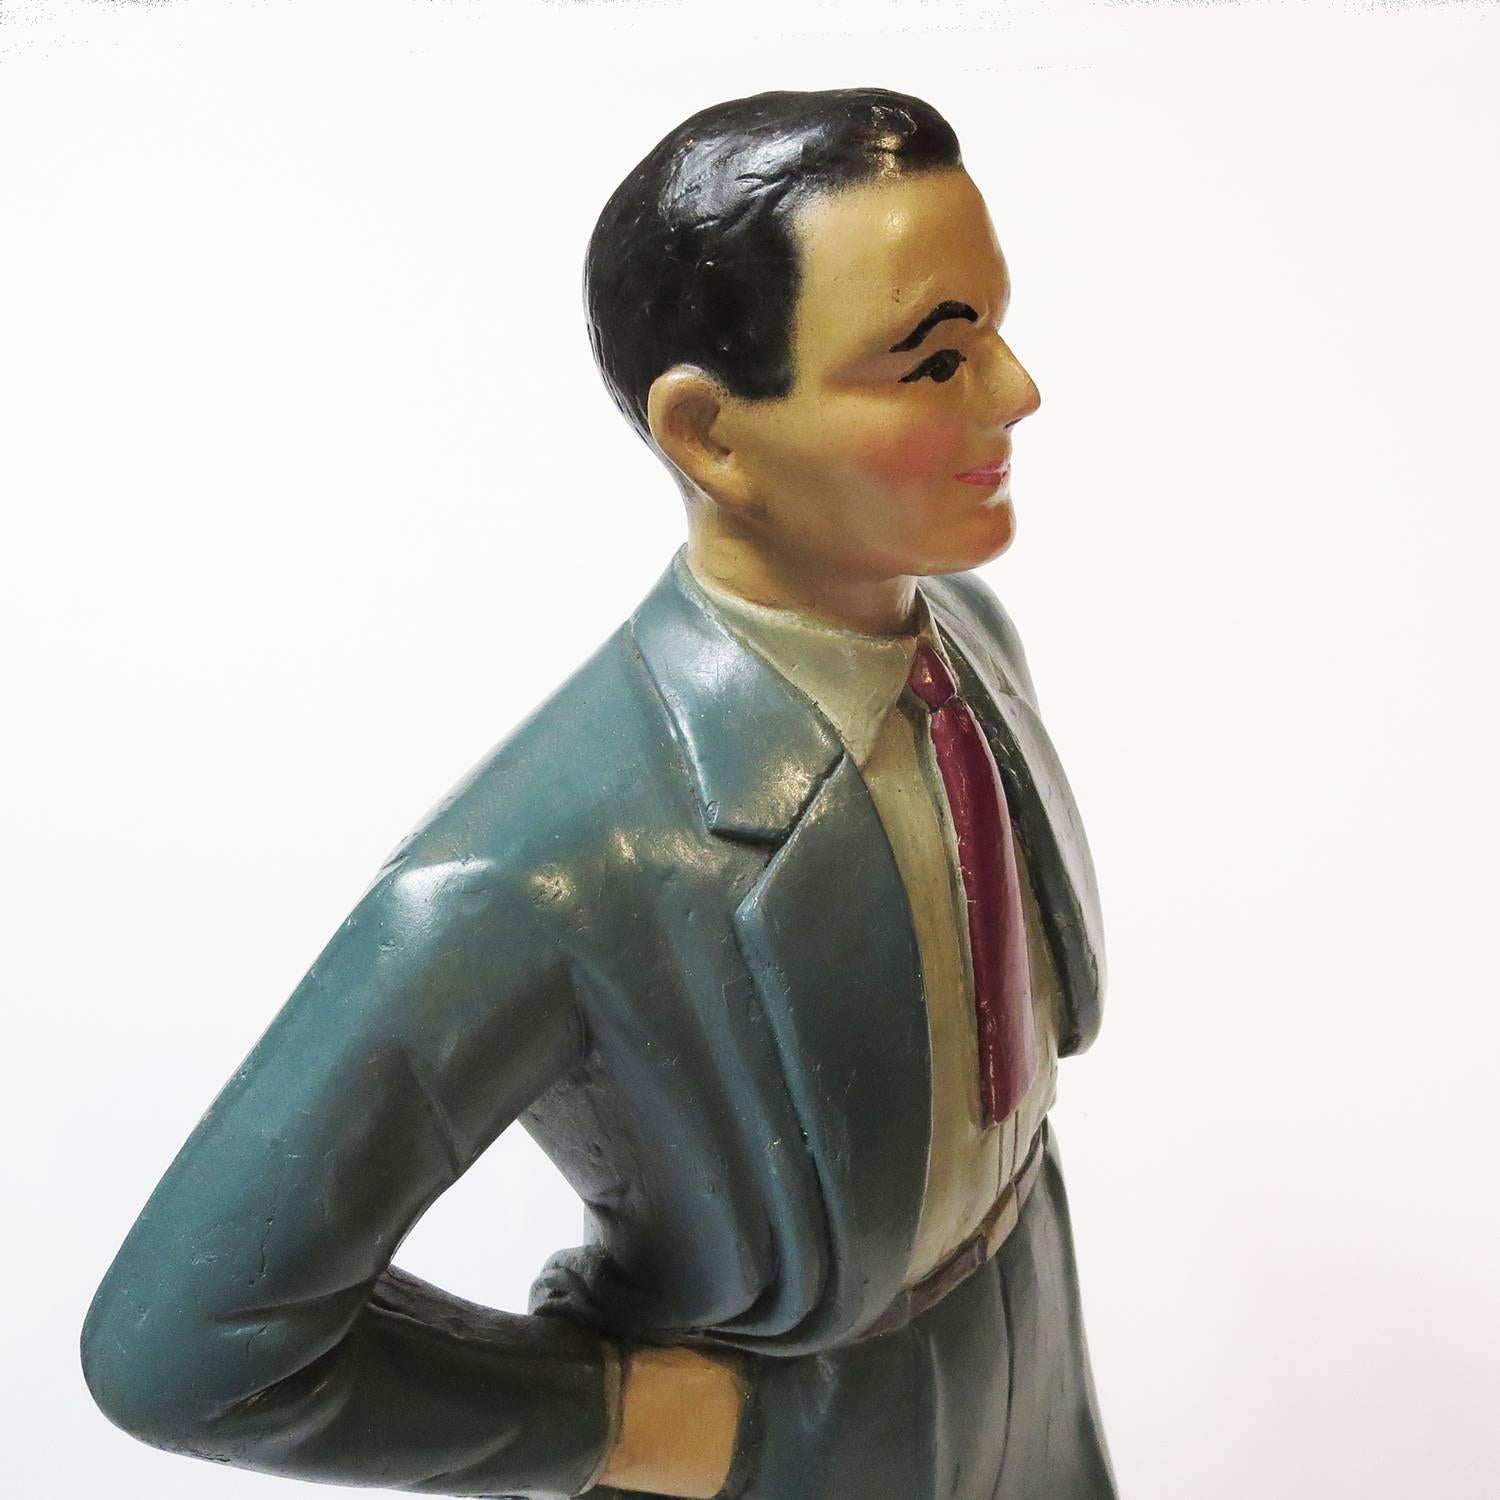 American 1940s Carved Wooden Painted Gentleman Counter Display in Blue Suit